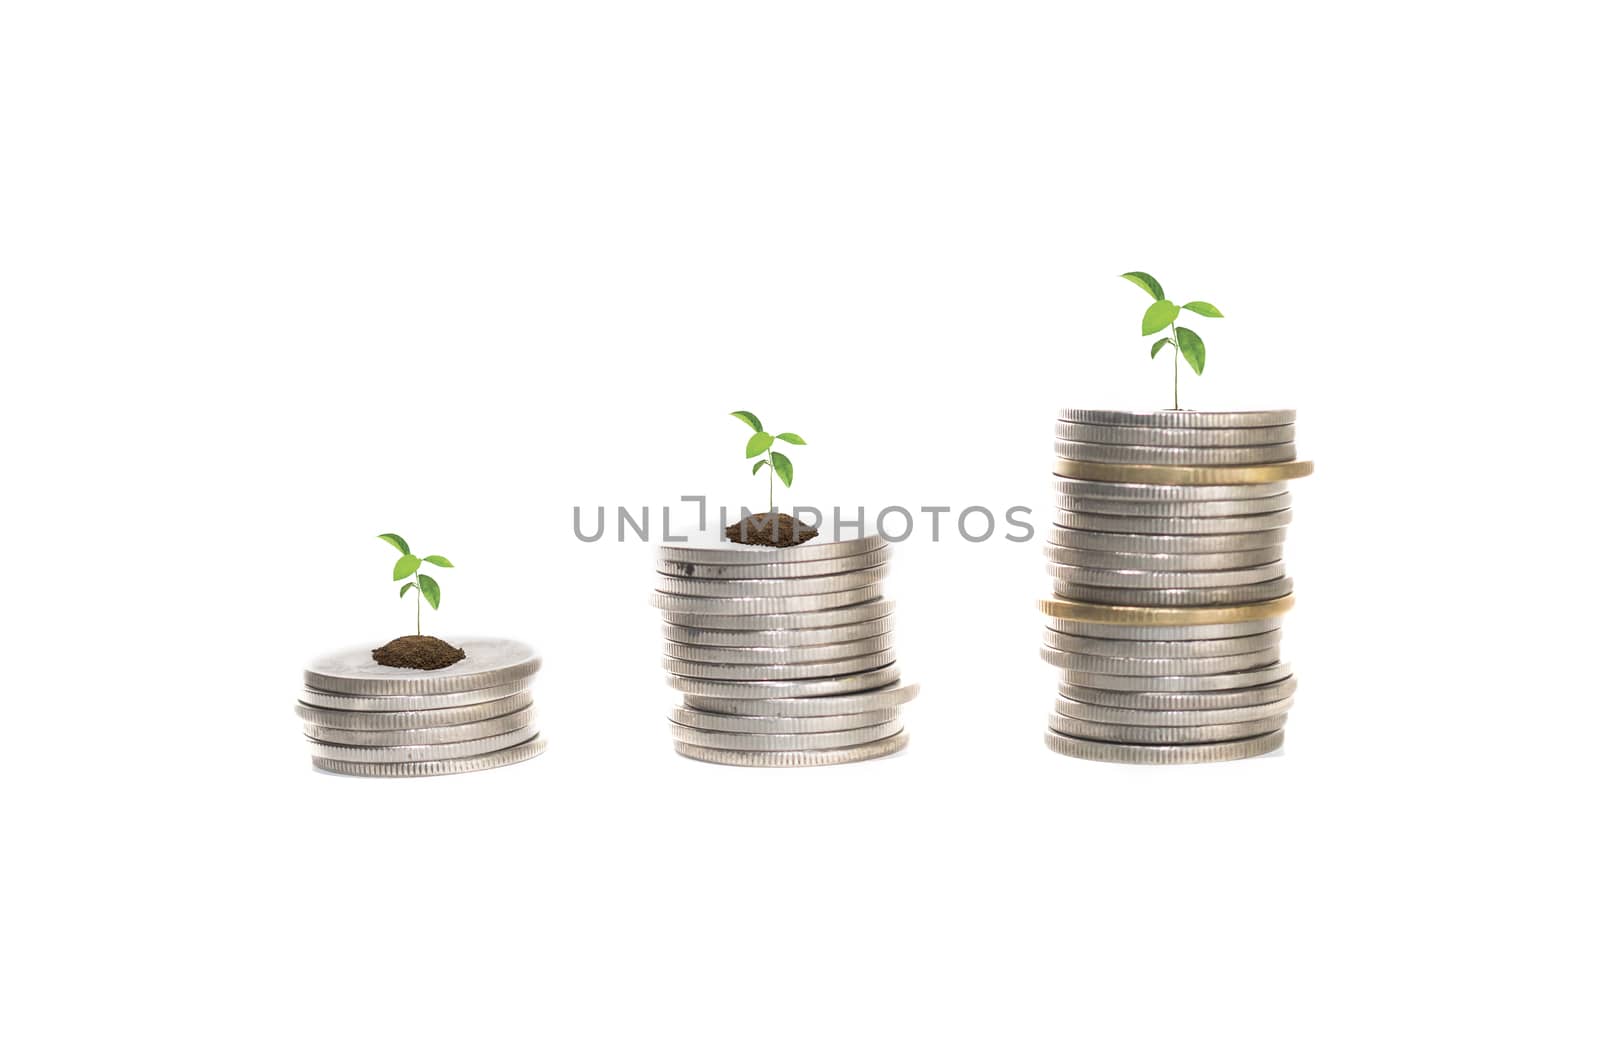  coins stacks with tree growing on top, saving and investment or business planing